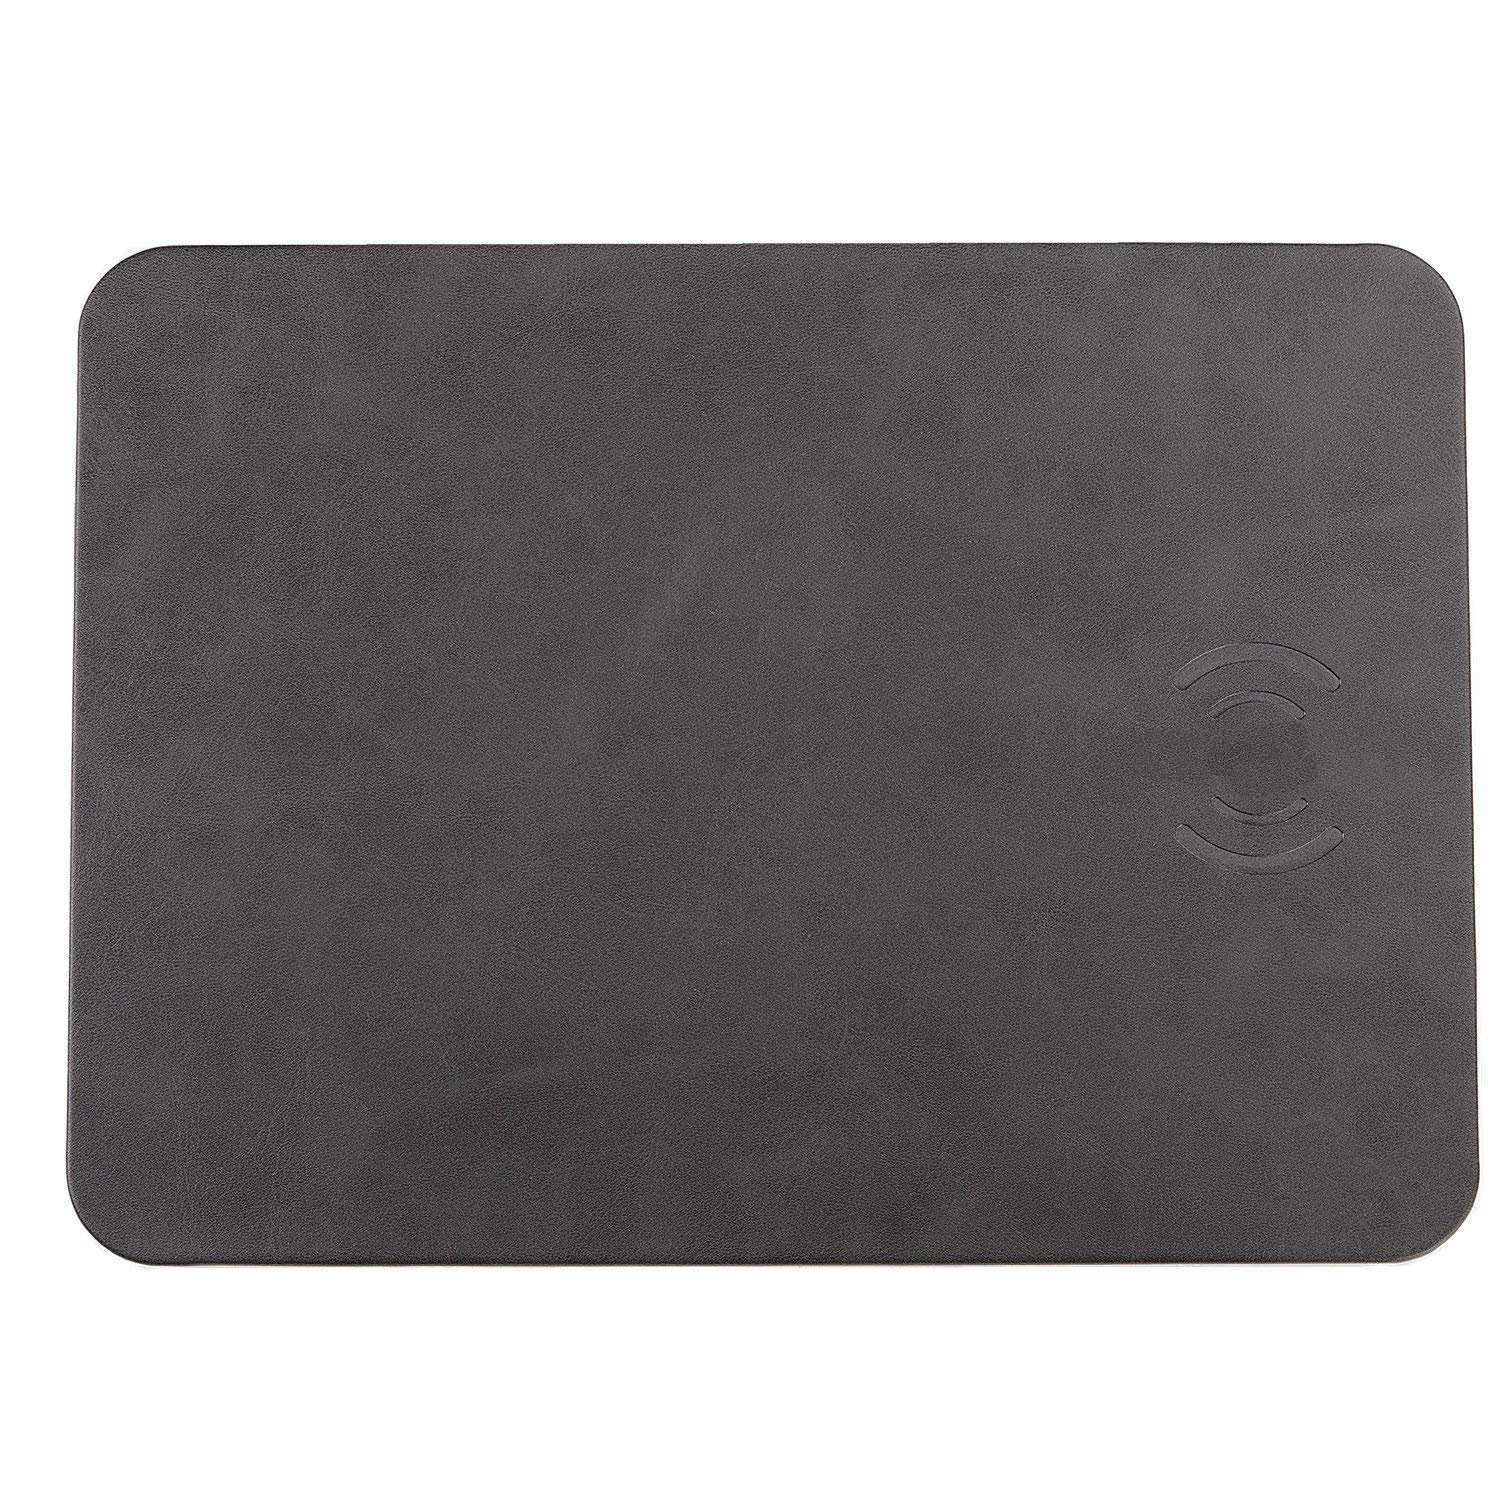 HF-WMC: Mouse pad with Wireless Charger, Qi Certified 10W Fast Wireless Charging Pad